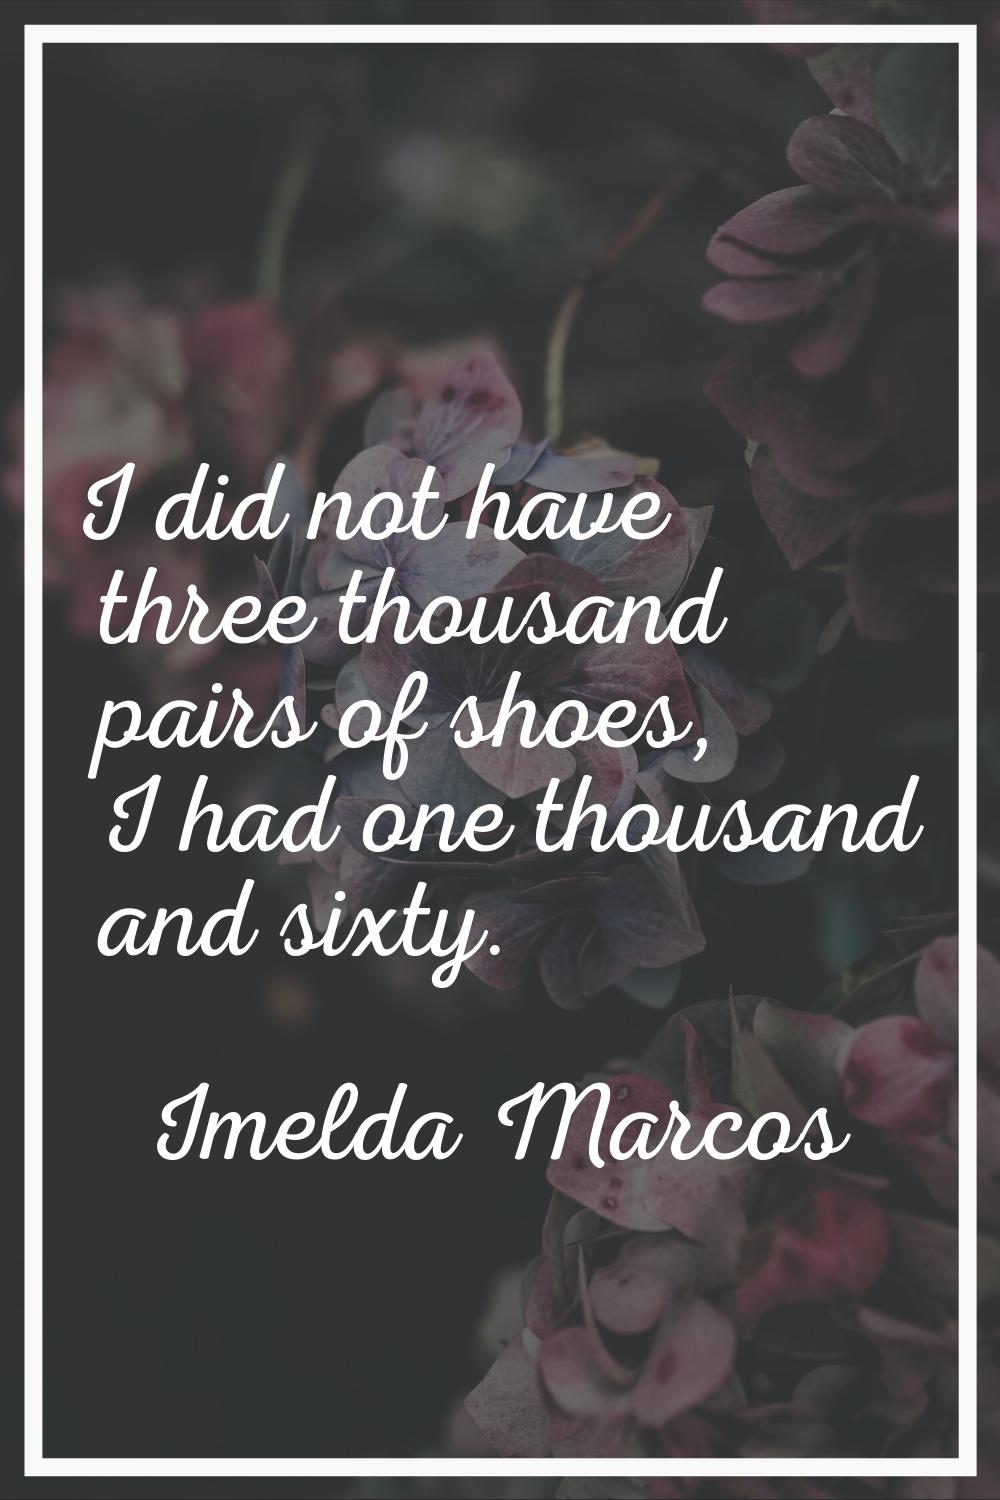 I did not have three thousand pairs of shoes, I had one thousand and sixty.